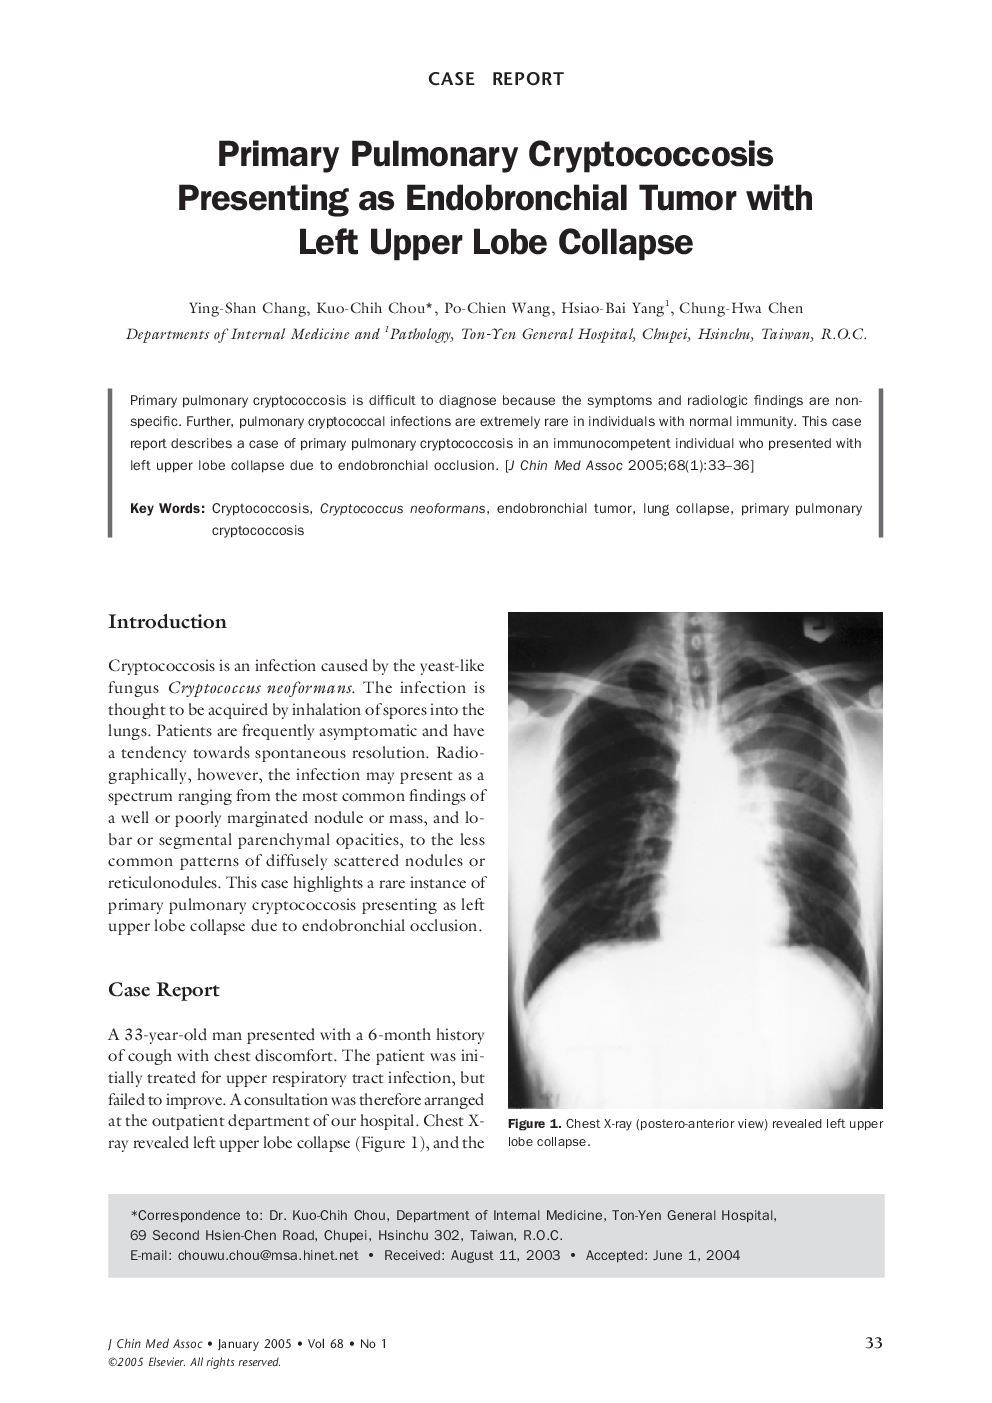 Primary Pulmonary Cryptococcosis Presenting as Endobronchial Tumor with Left Upper Lobe Collapse